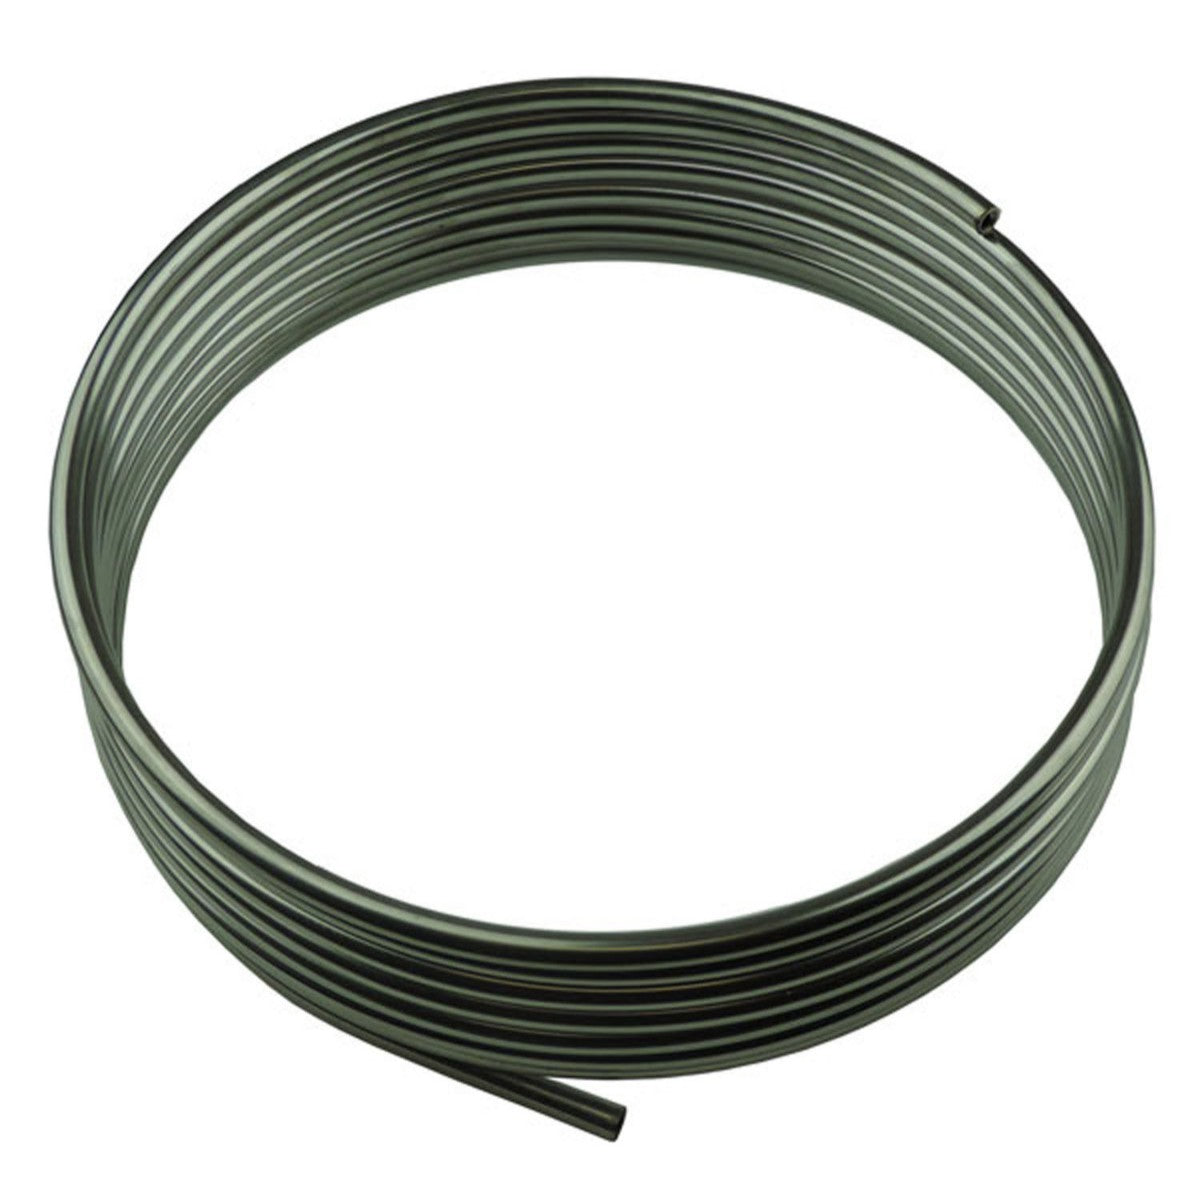 25 Foot Roll / Coil of 3/8 Steel Fuel Line Tubing